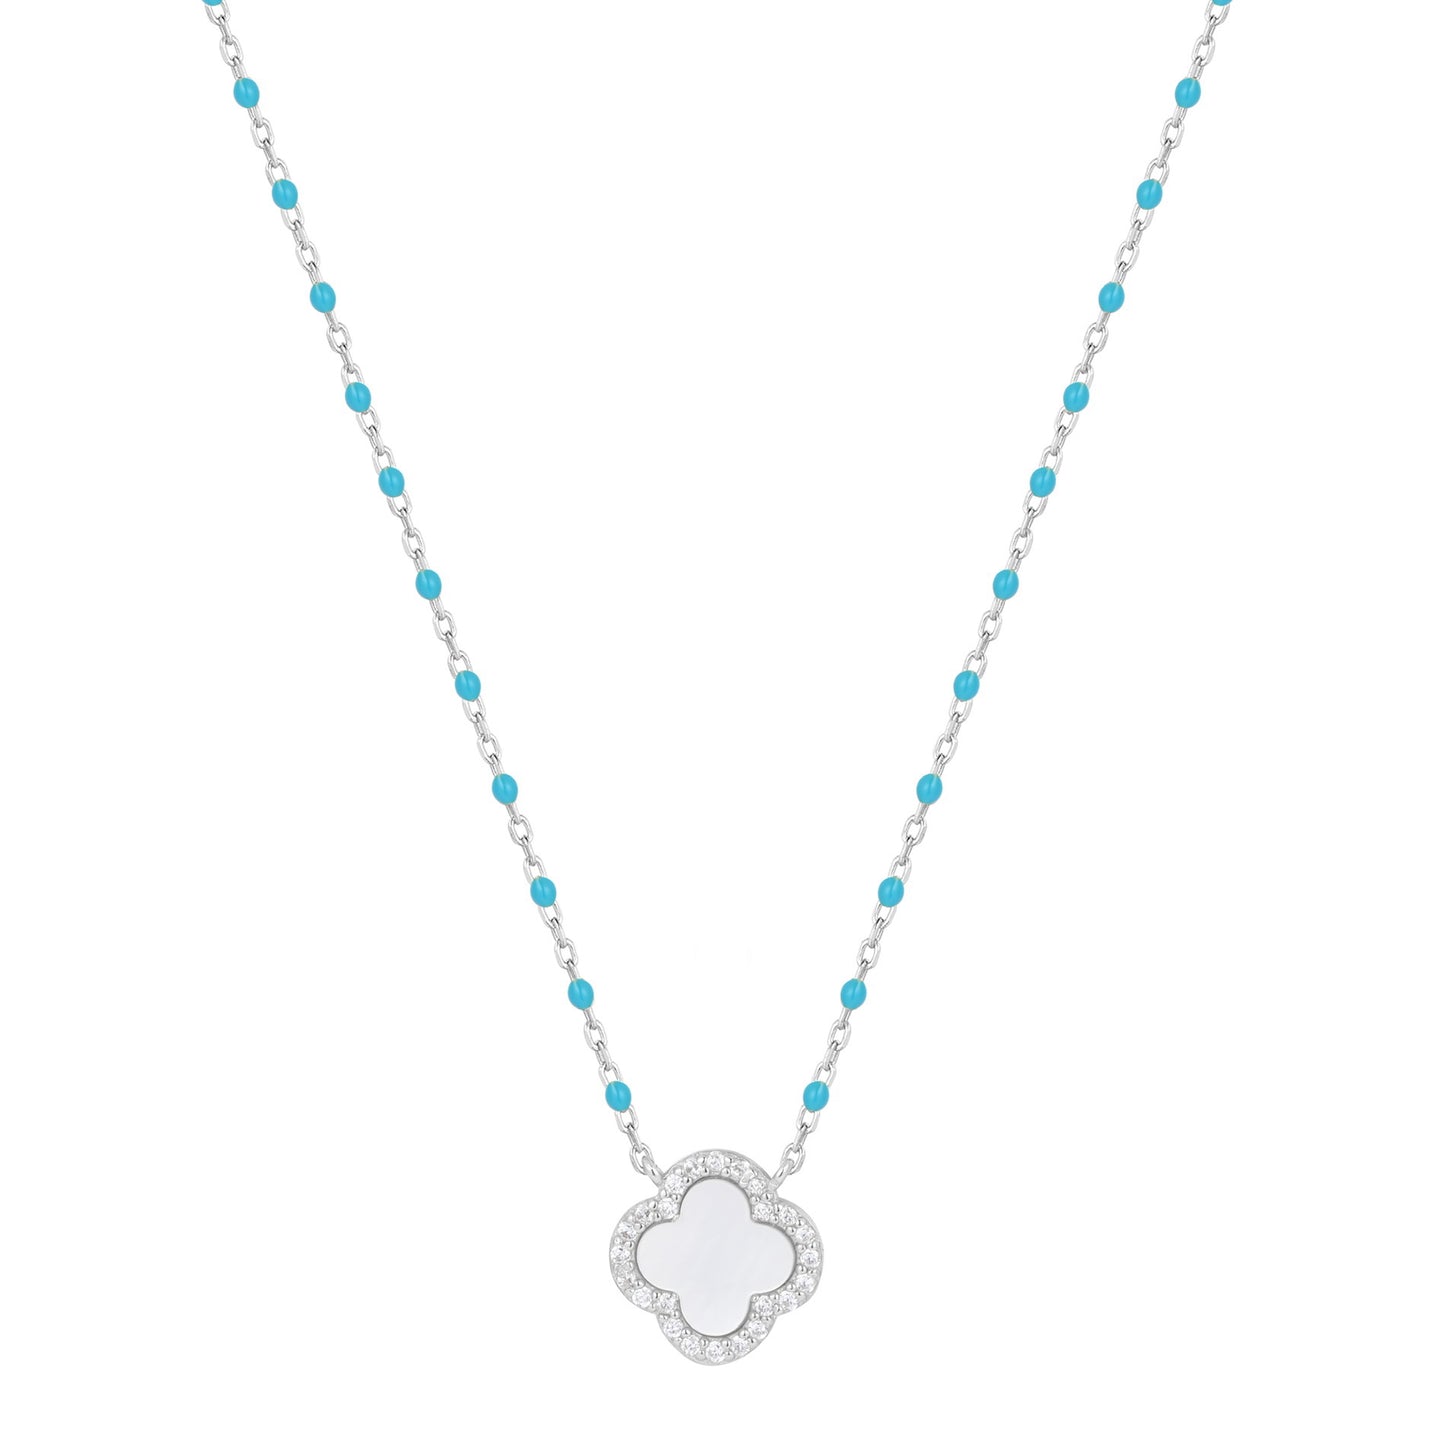 IMOGEN PEARL CLOVER BLUE BEADED SILVER NECKLACE